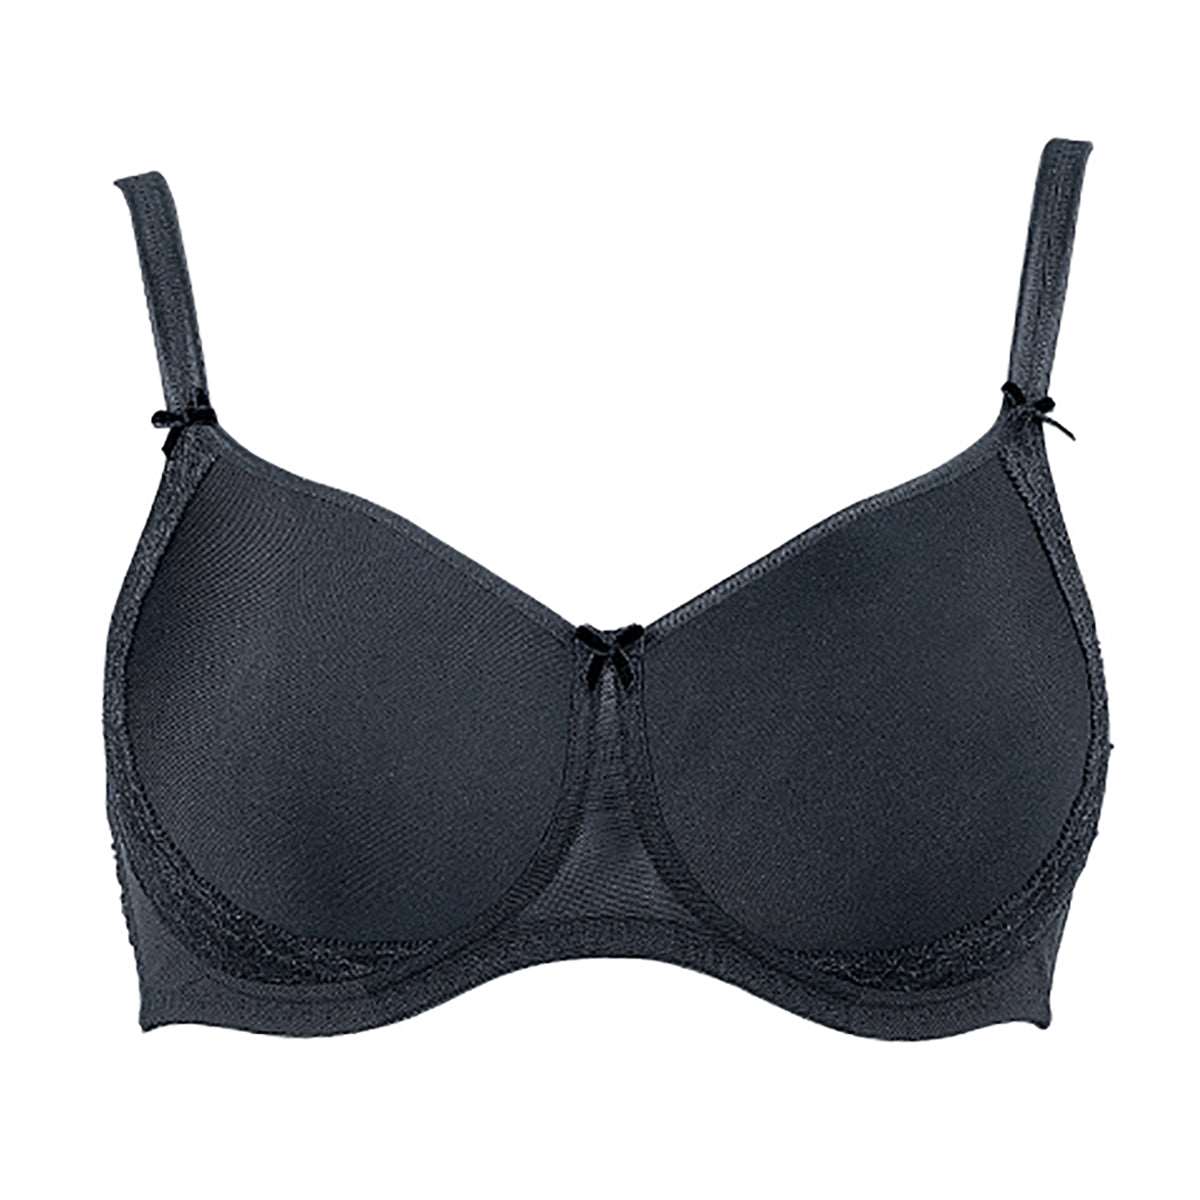 Buy Miss Mary of Sweden Black Lovely Lace Non Wired Bra from Next USA